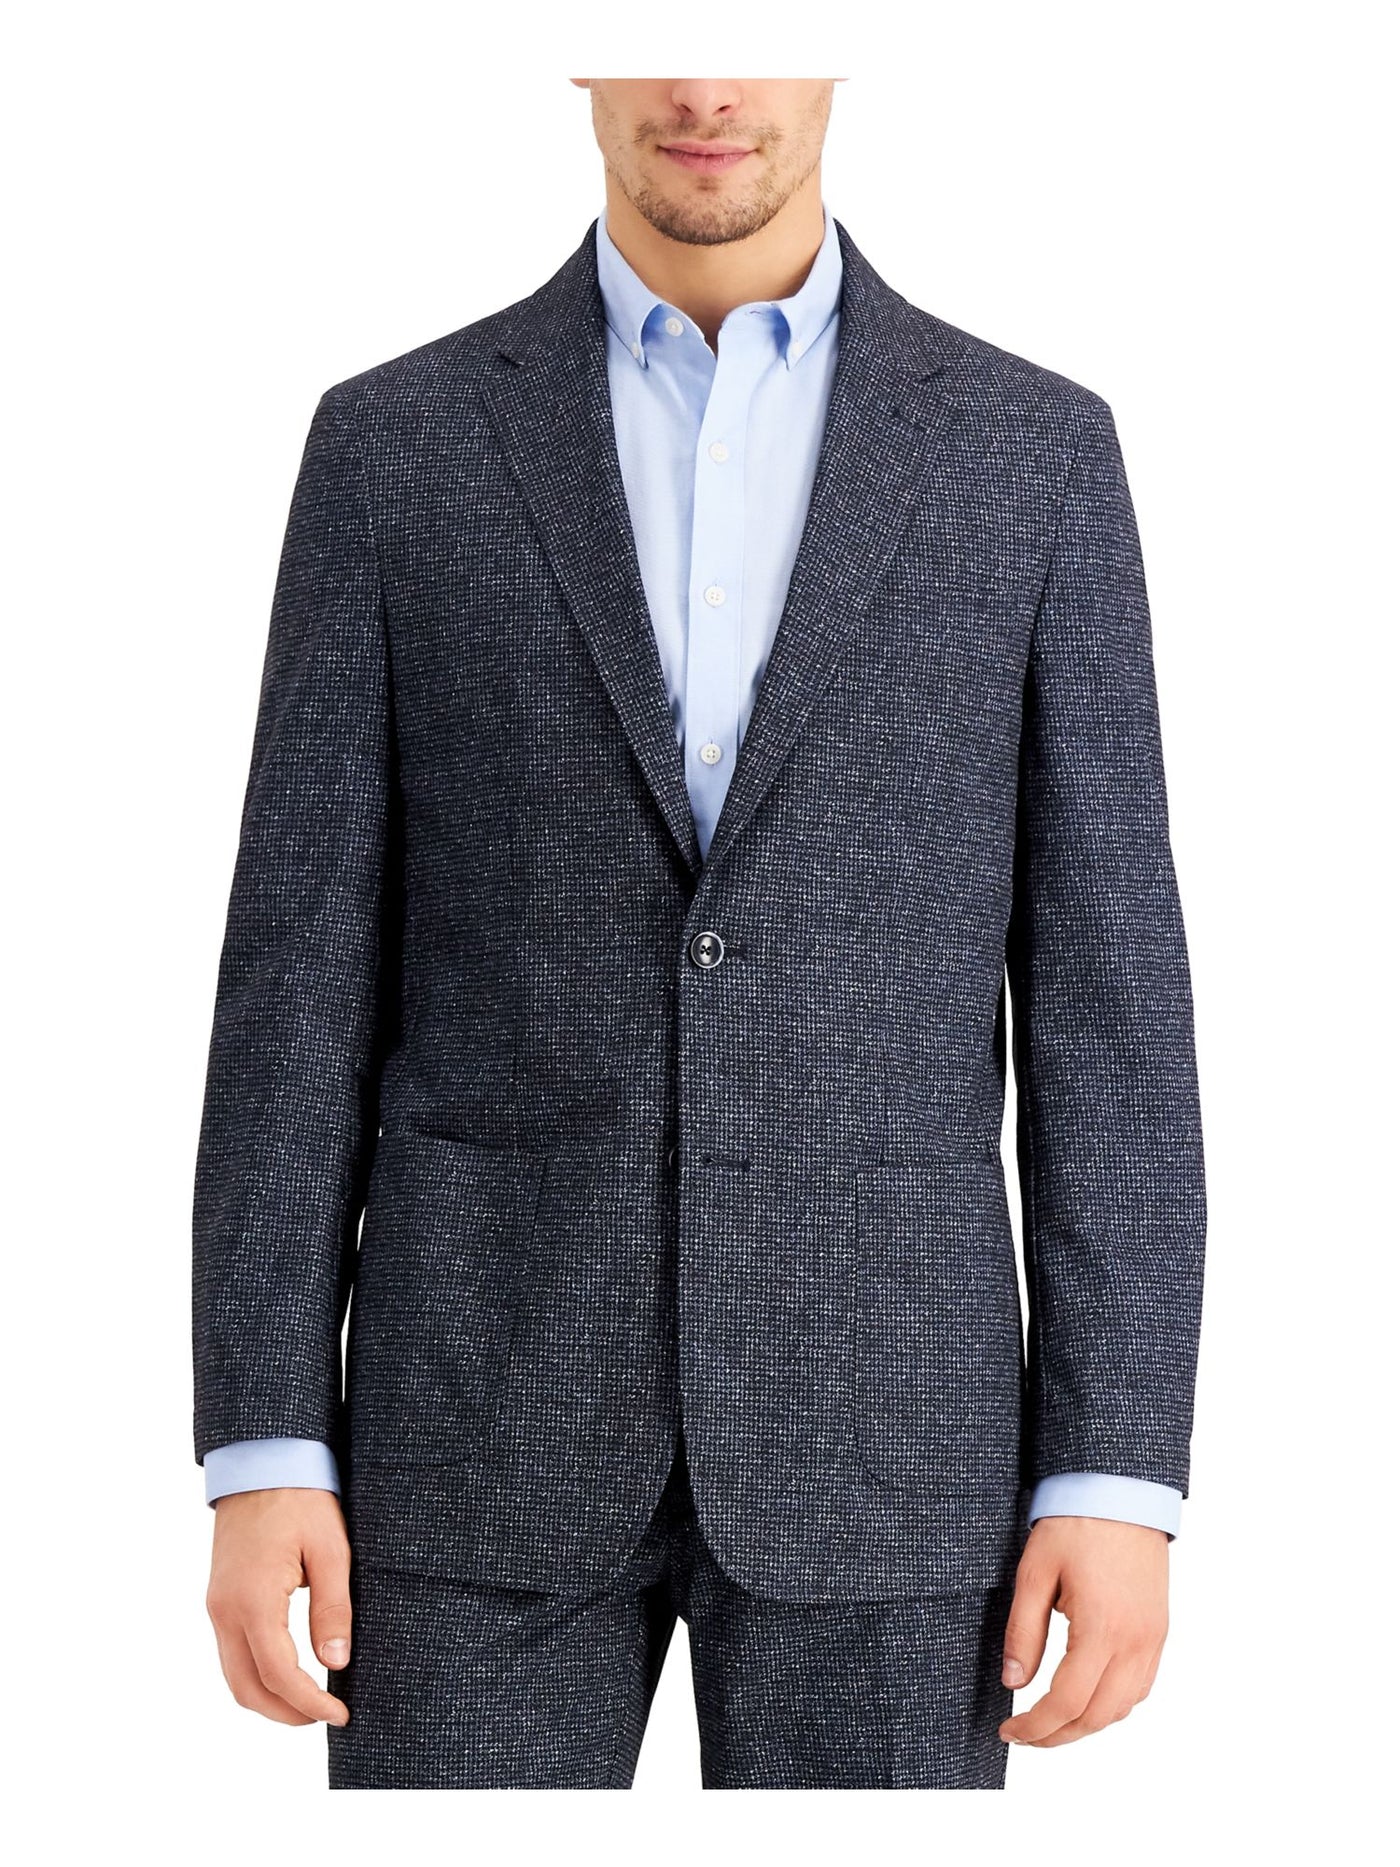 TOMMY HILFIGER Mens Navy Single Breasted, Houndstooth Classic Fit Performance Stretch Suit Separate Blazer Jacket 38S